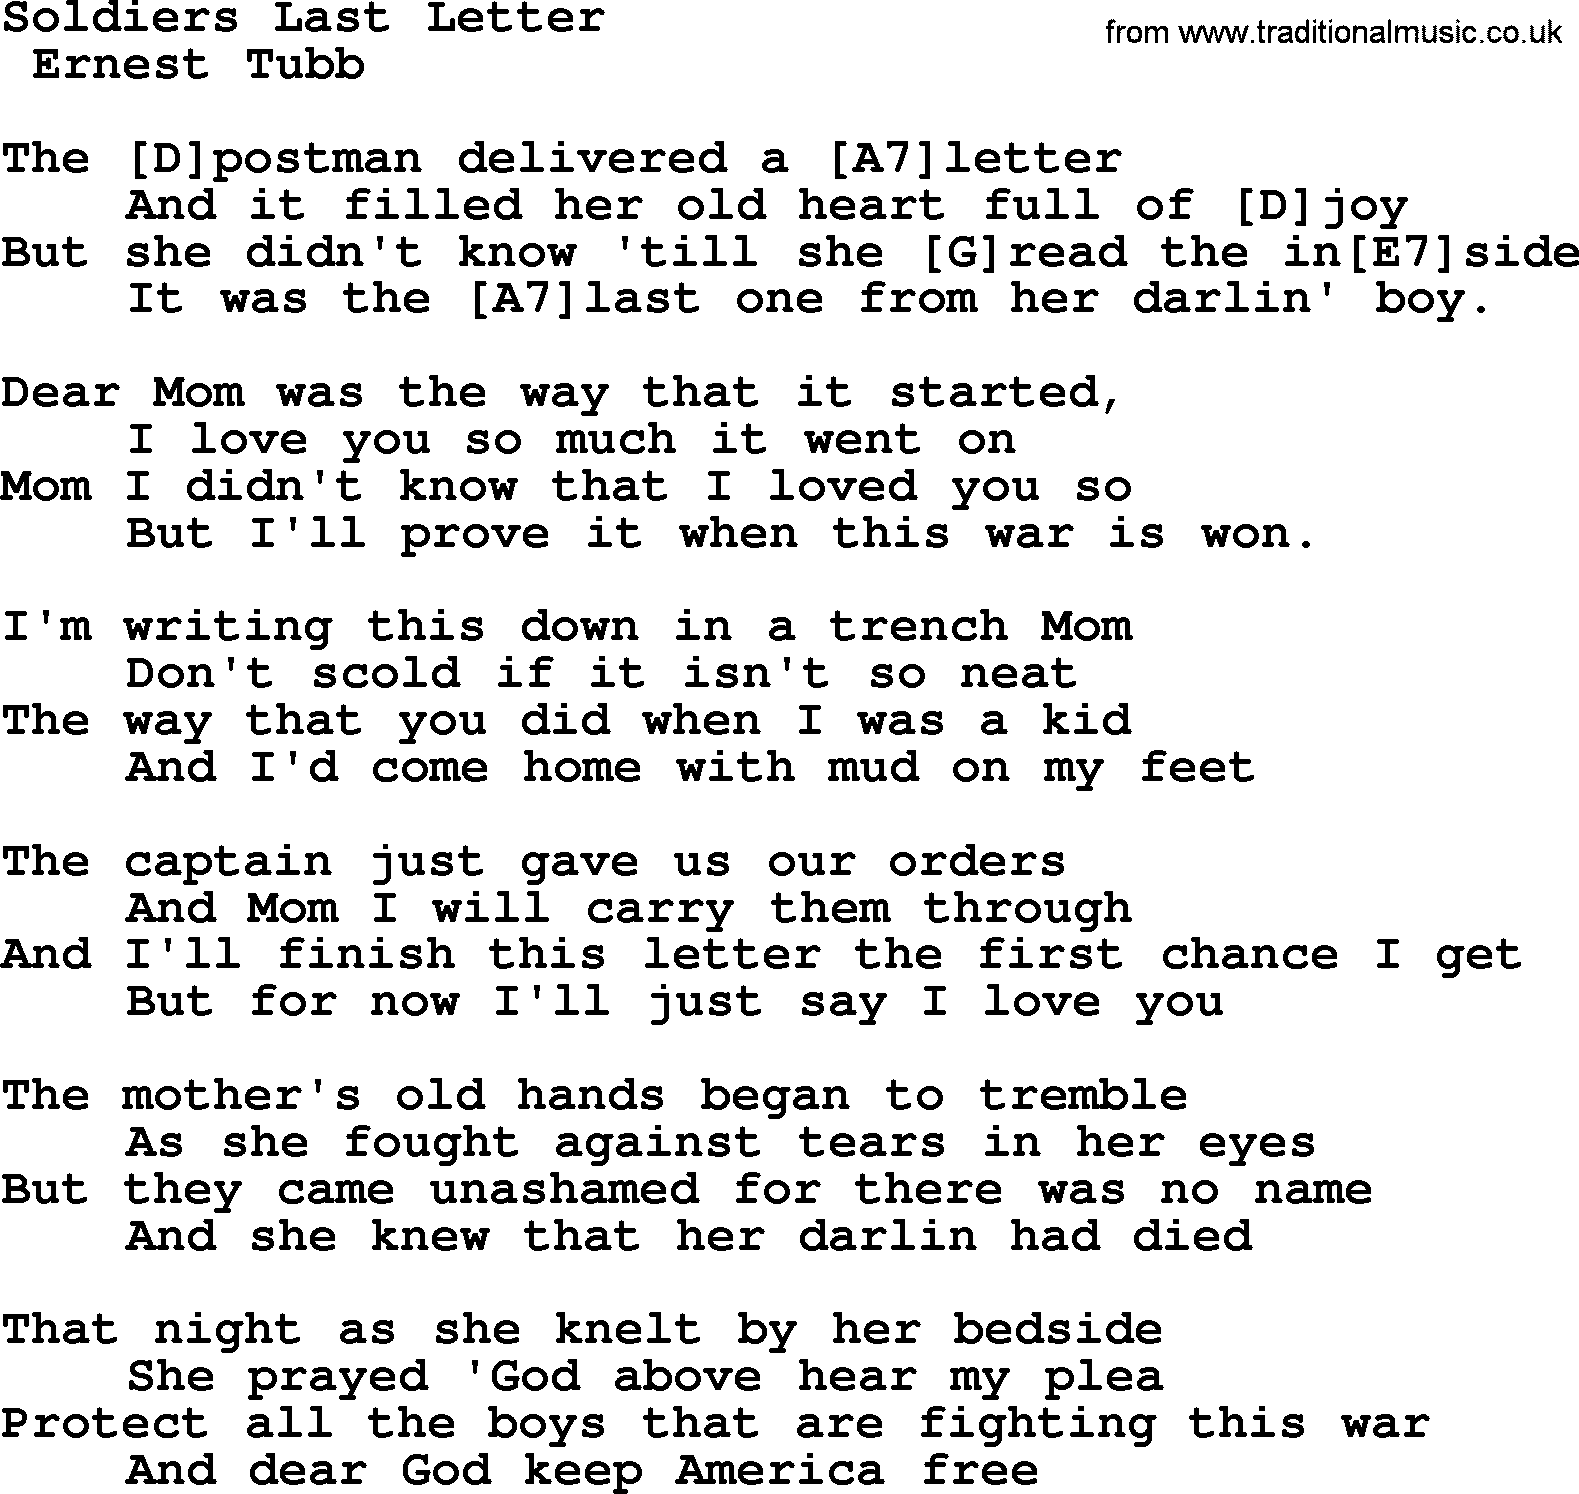 Merle Haggard song: Soldiers Last Letter, lyrics and chords